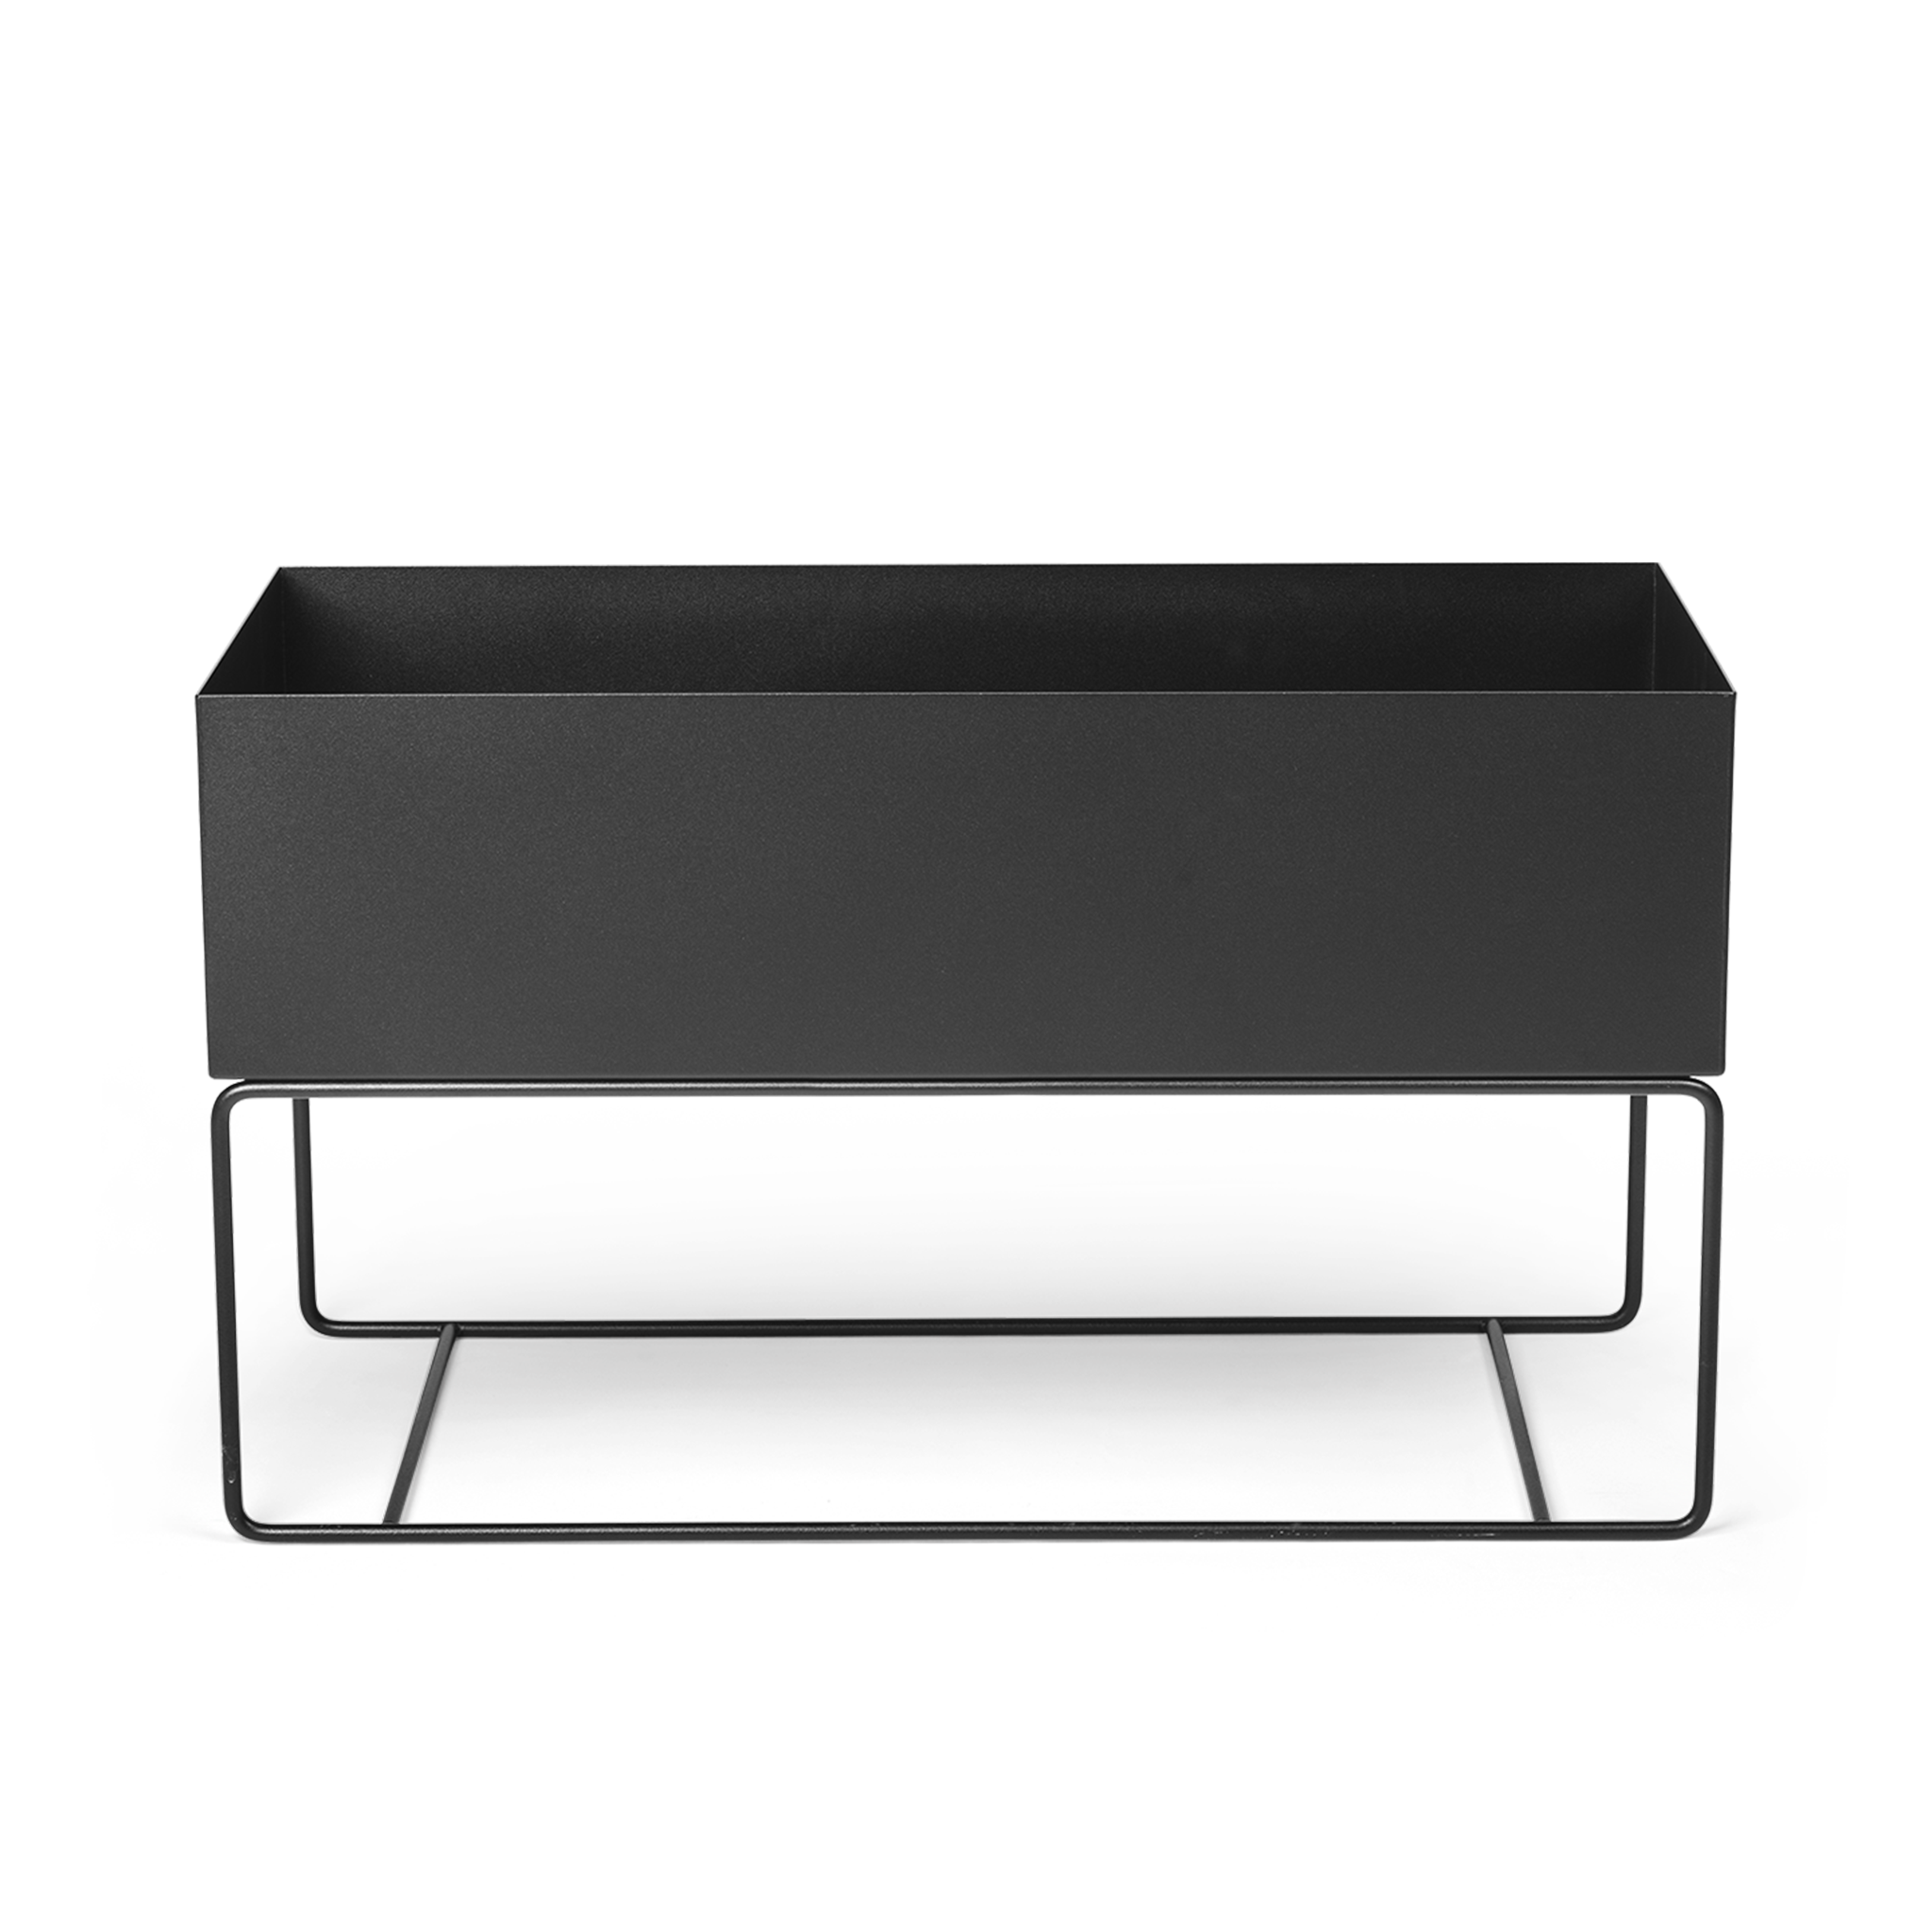 Plant Box - Large by Ferm Living